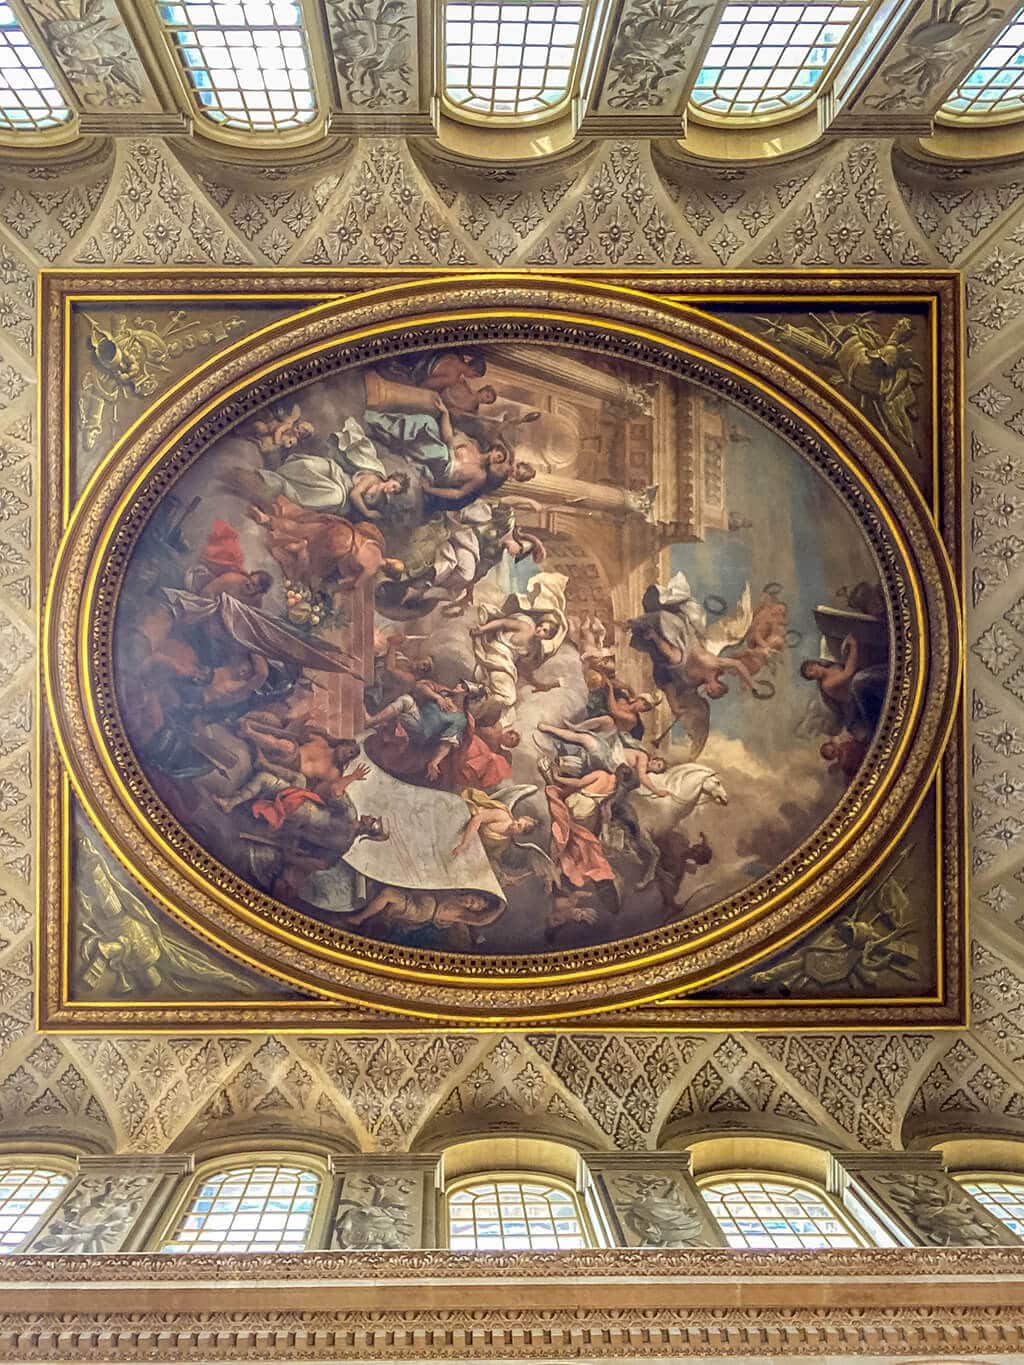 painting on the ceiling in the grand hall